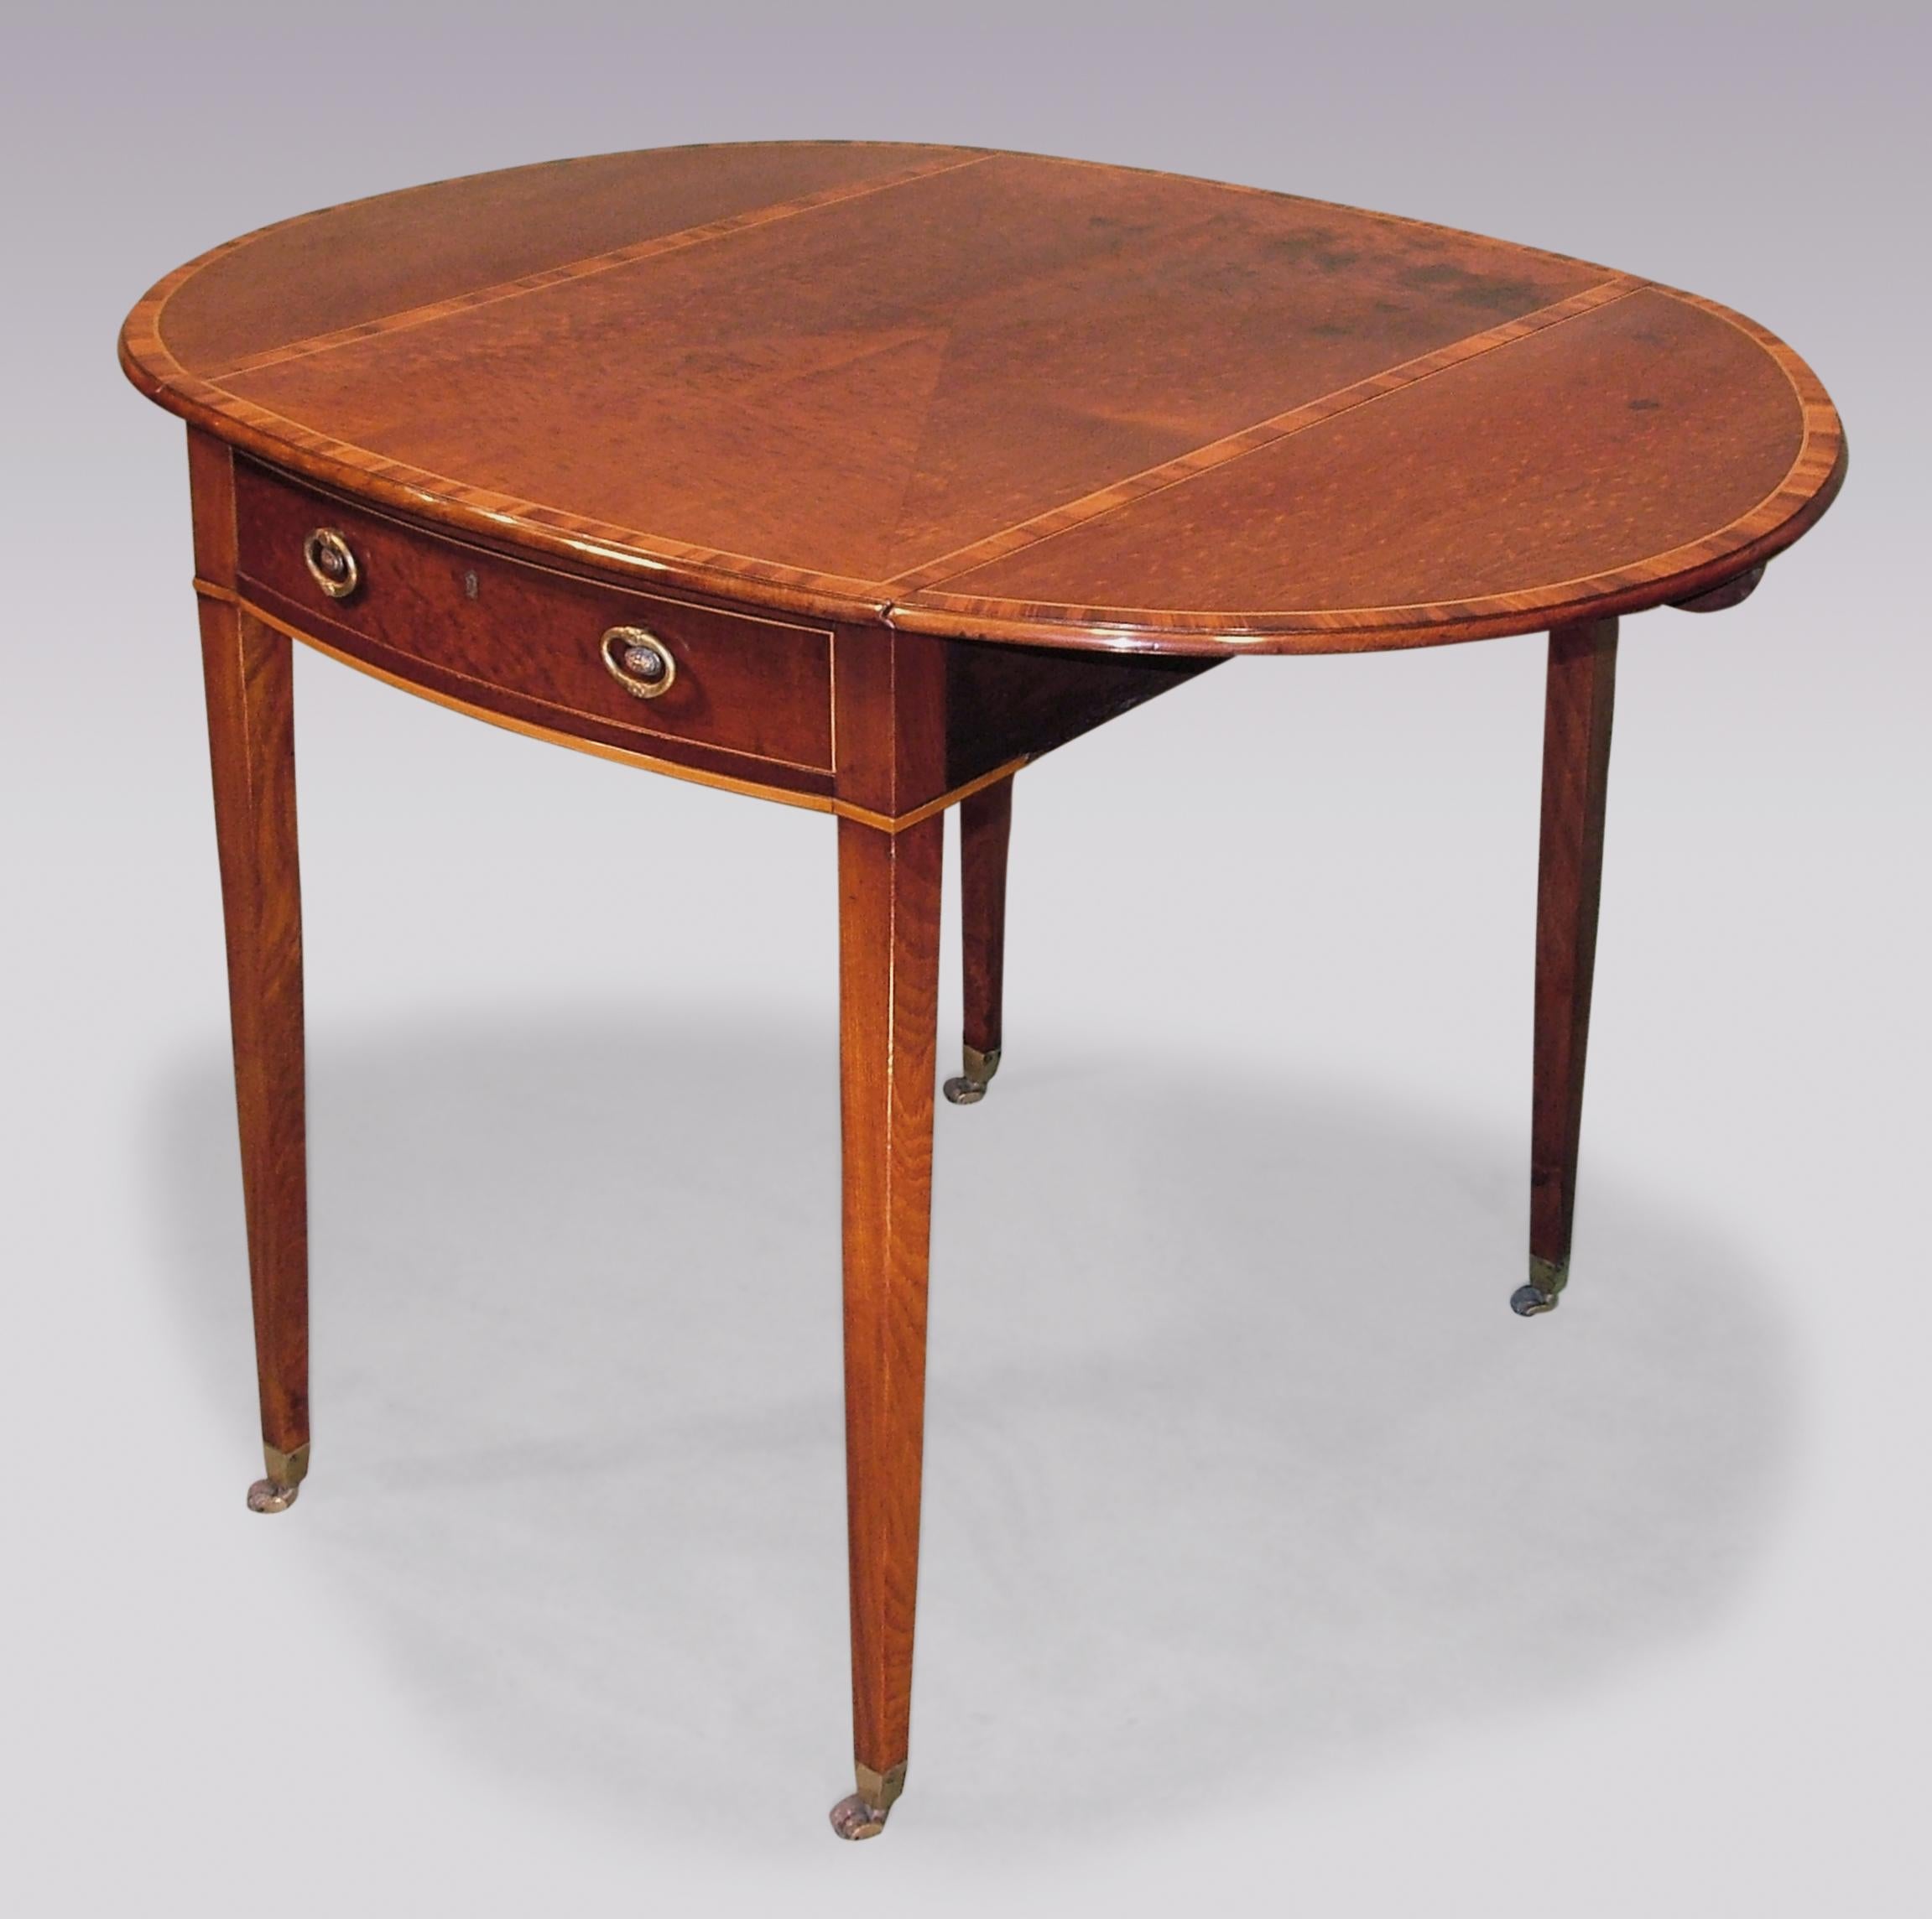 A late 18th century Sheraton period fiddle back mahogany Pembroke table having padouk wood, box wood and ebony banded oval top with mitred center above frieze drawer retaining original handles supported on square tapering legs ending on original